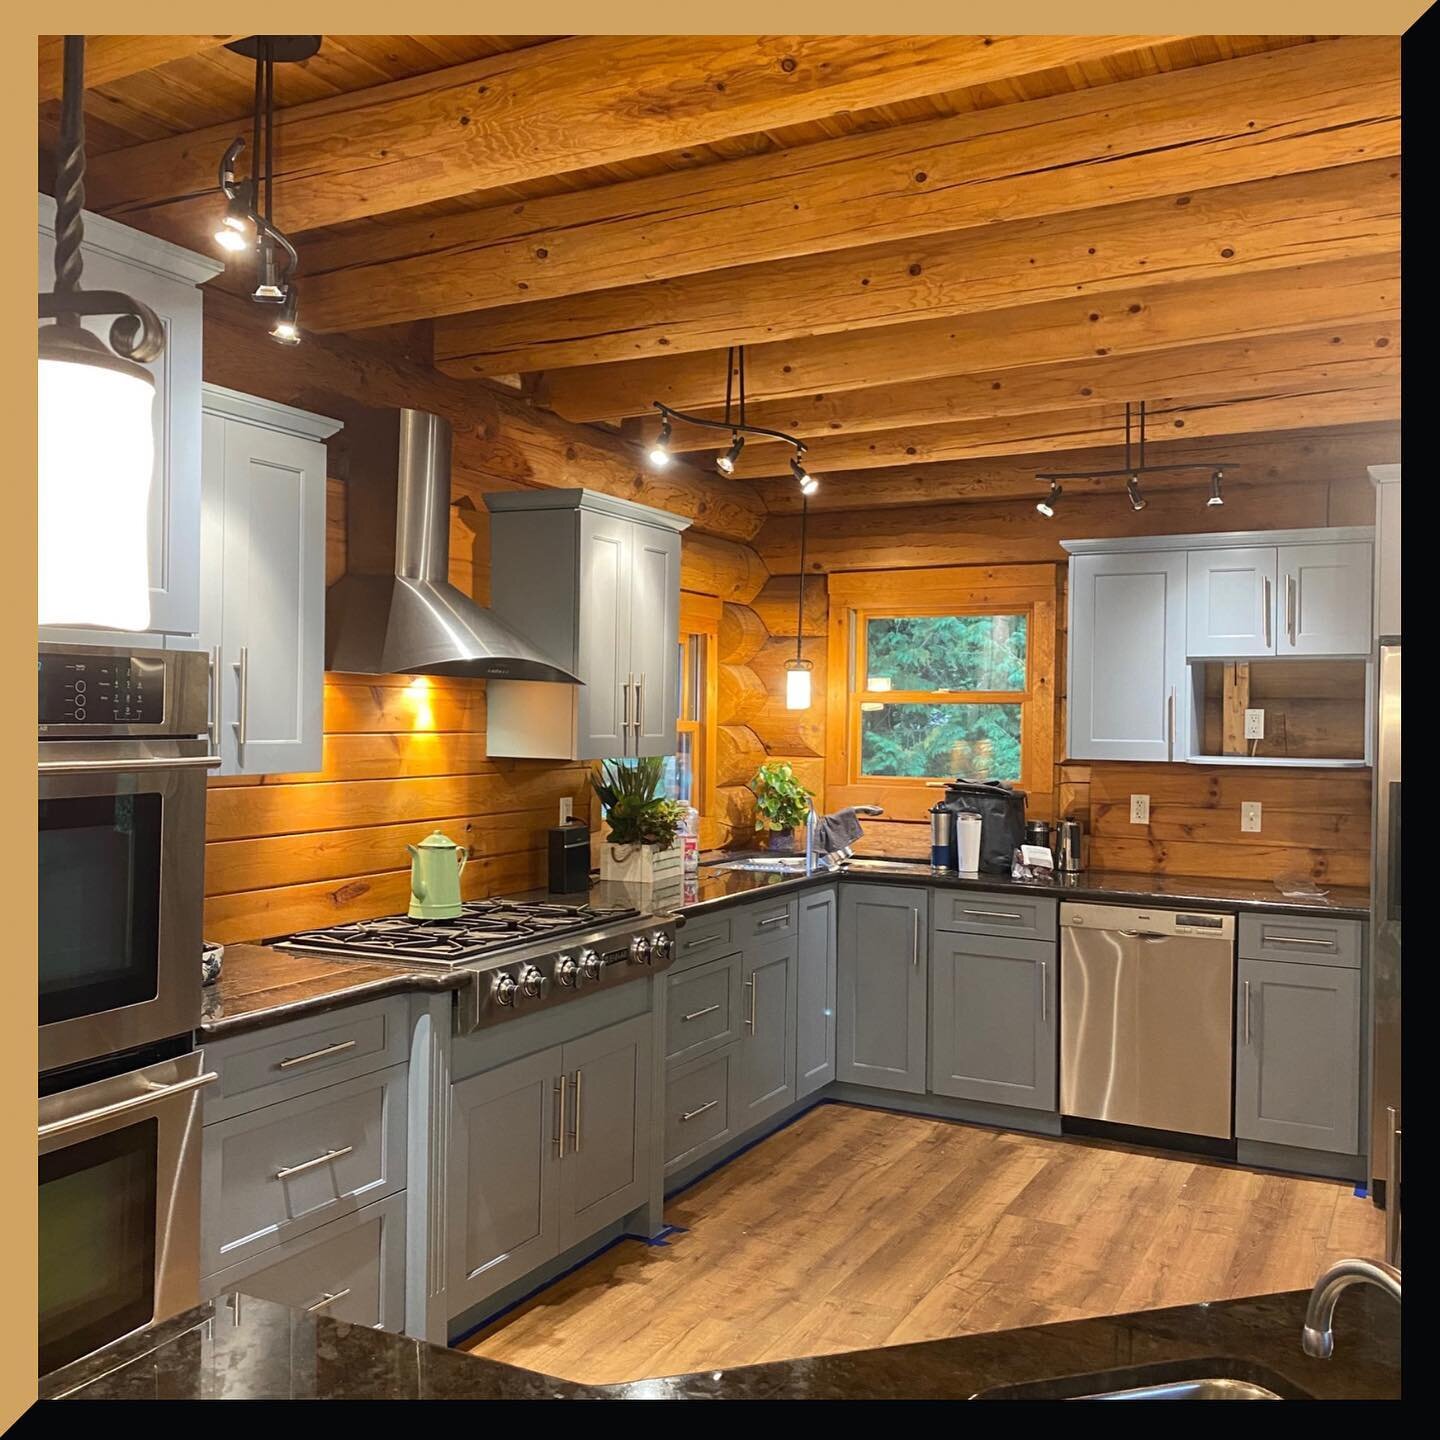 &bull; &bull; That&rsquo;s what&rsquo;s up! 😍🤭

[McHugh Painting &bull; Since 2008]
The Peace Of Mind You Deserve.

7-Year Warranty on Interior and Exterior
Lifetime Warranty on Cabinets
100+ 5-Star Reviews!

👉 Call (226) 546-1727 for a Free Estim